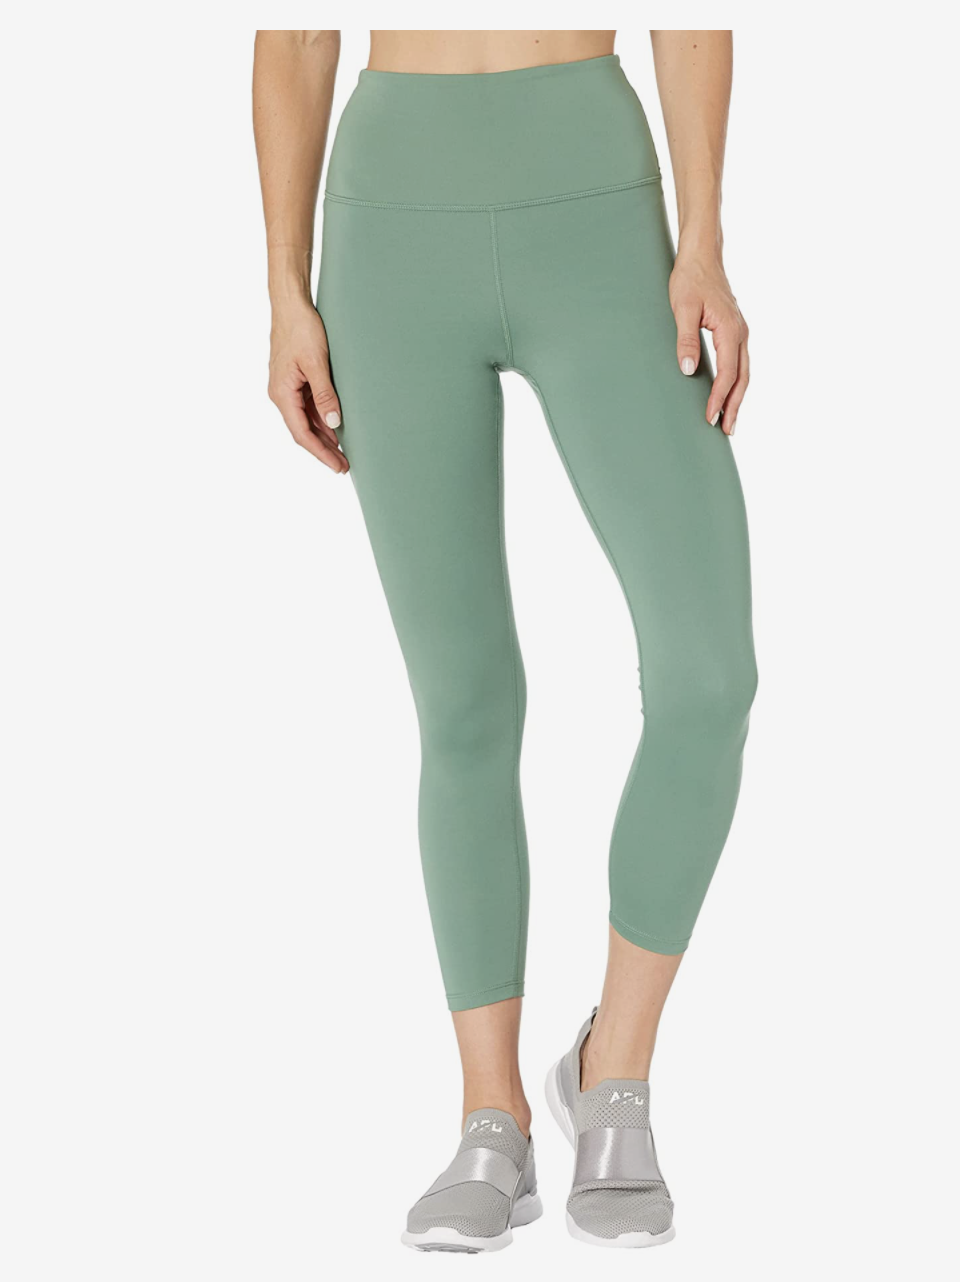 Carbon38 High-Rise 7/8 Length Leggings In Cloud Compression